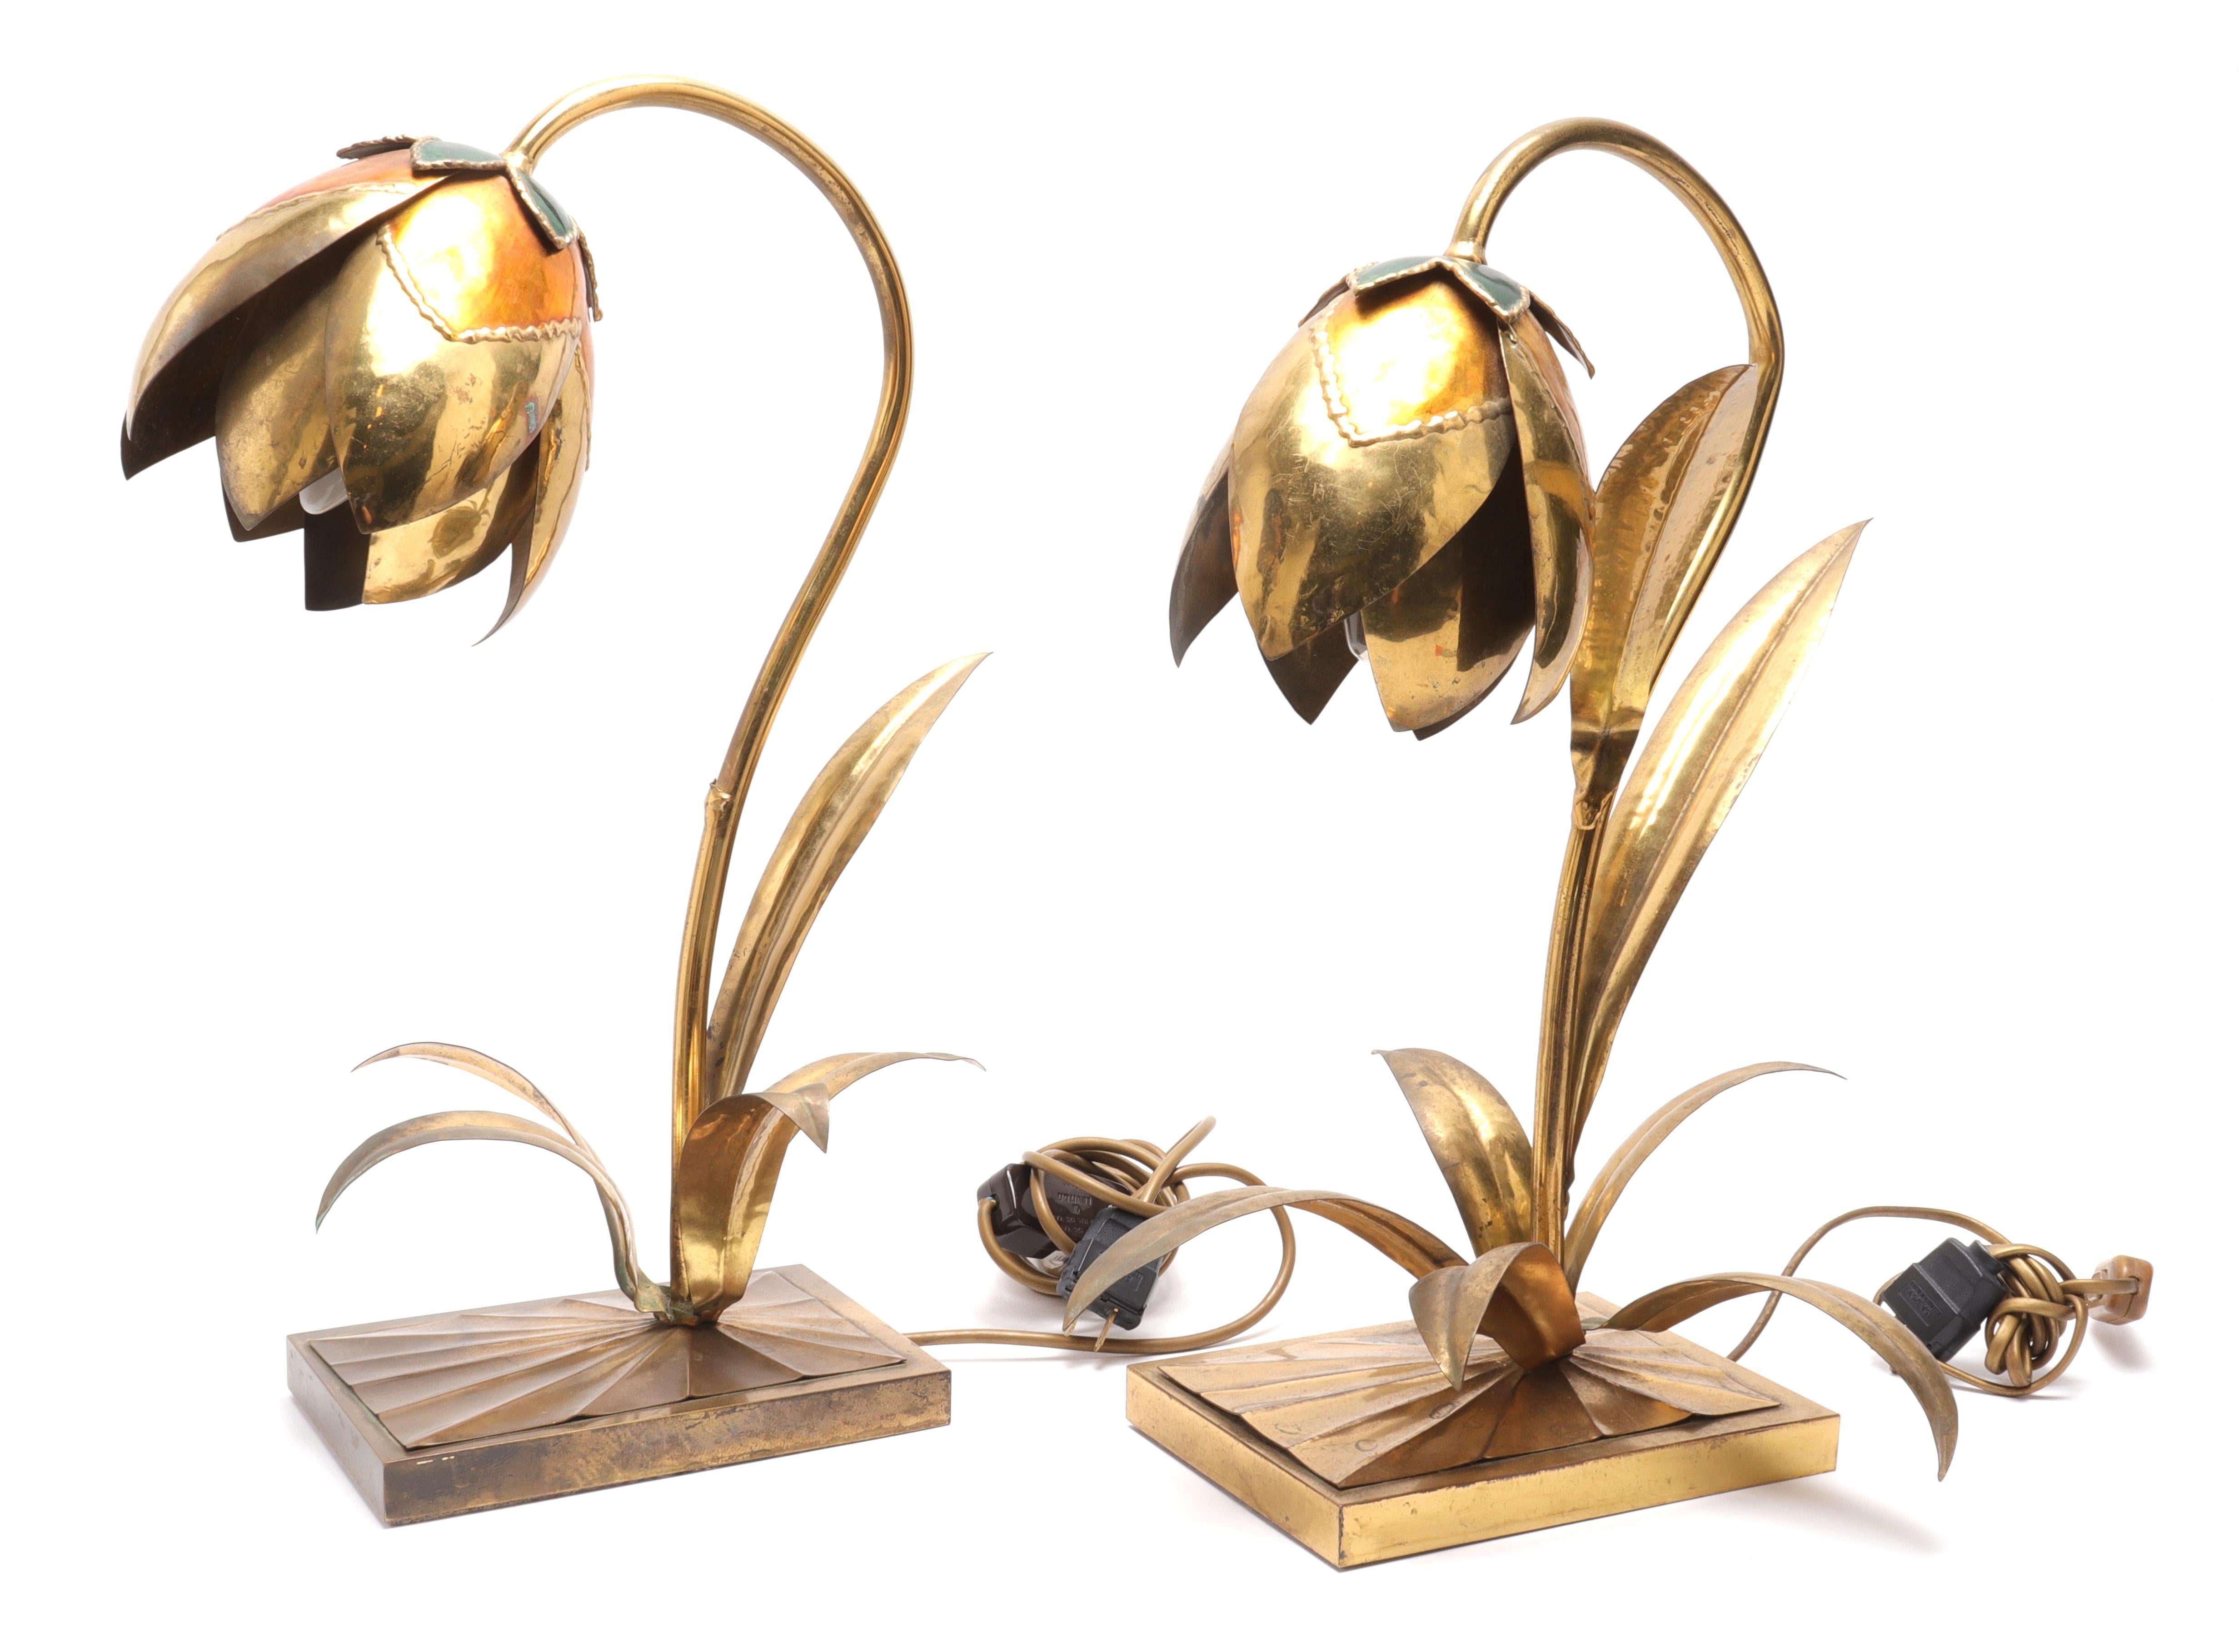 Pair of Maison Jansen style Mid-Century Modern brass and enamel table lamps, in flower form with curving stem, leaves, and rectangular bases. Size: Approximate 18.5